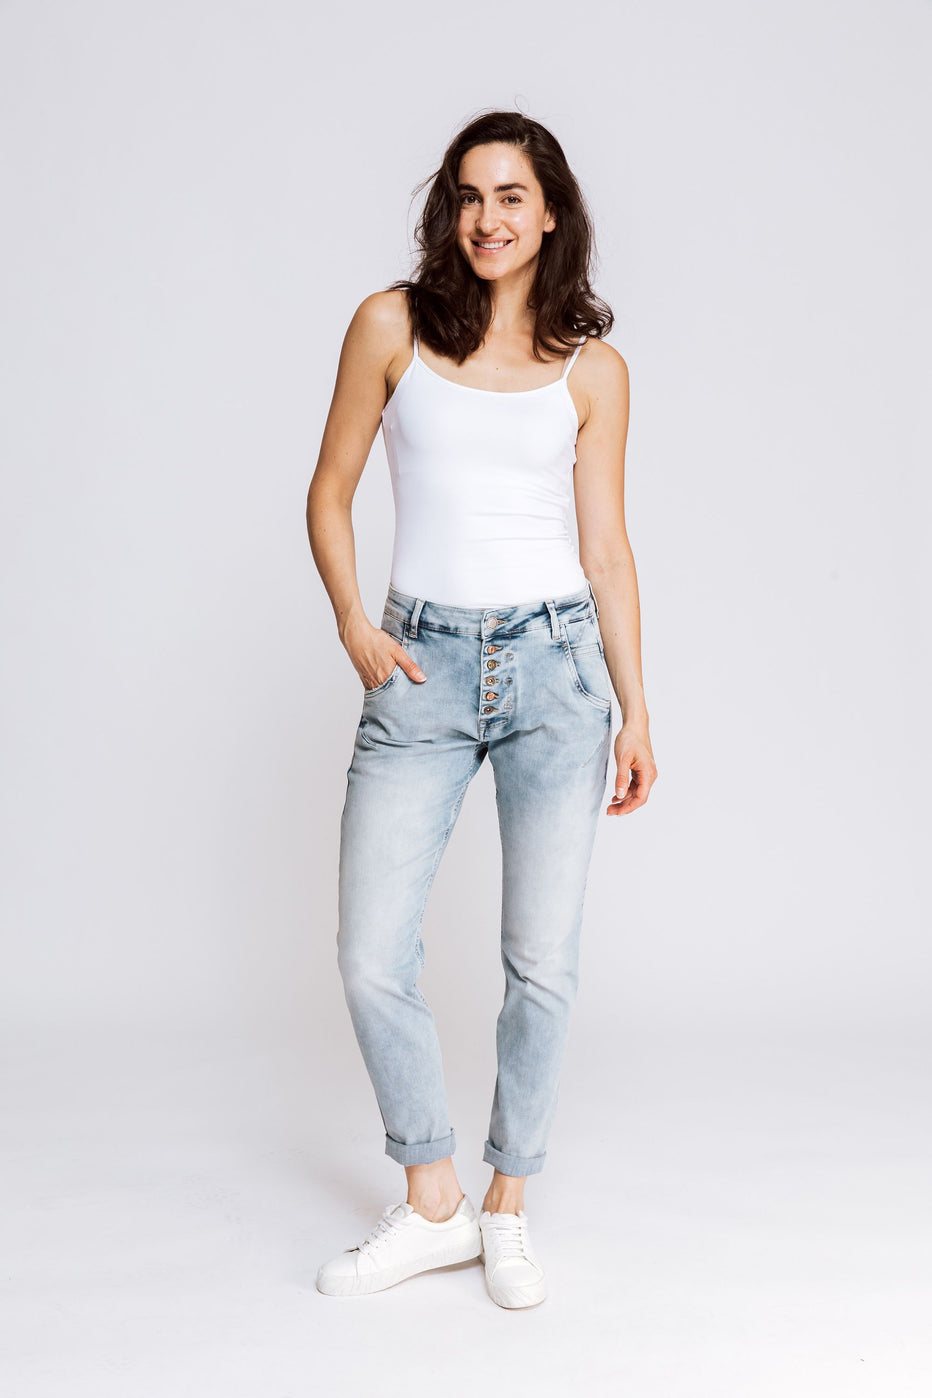 Zhrill - Amy Blue Jean D123926